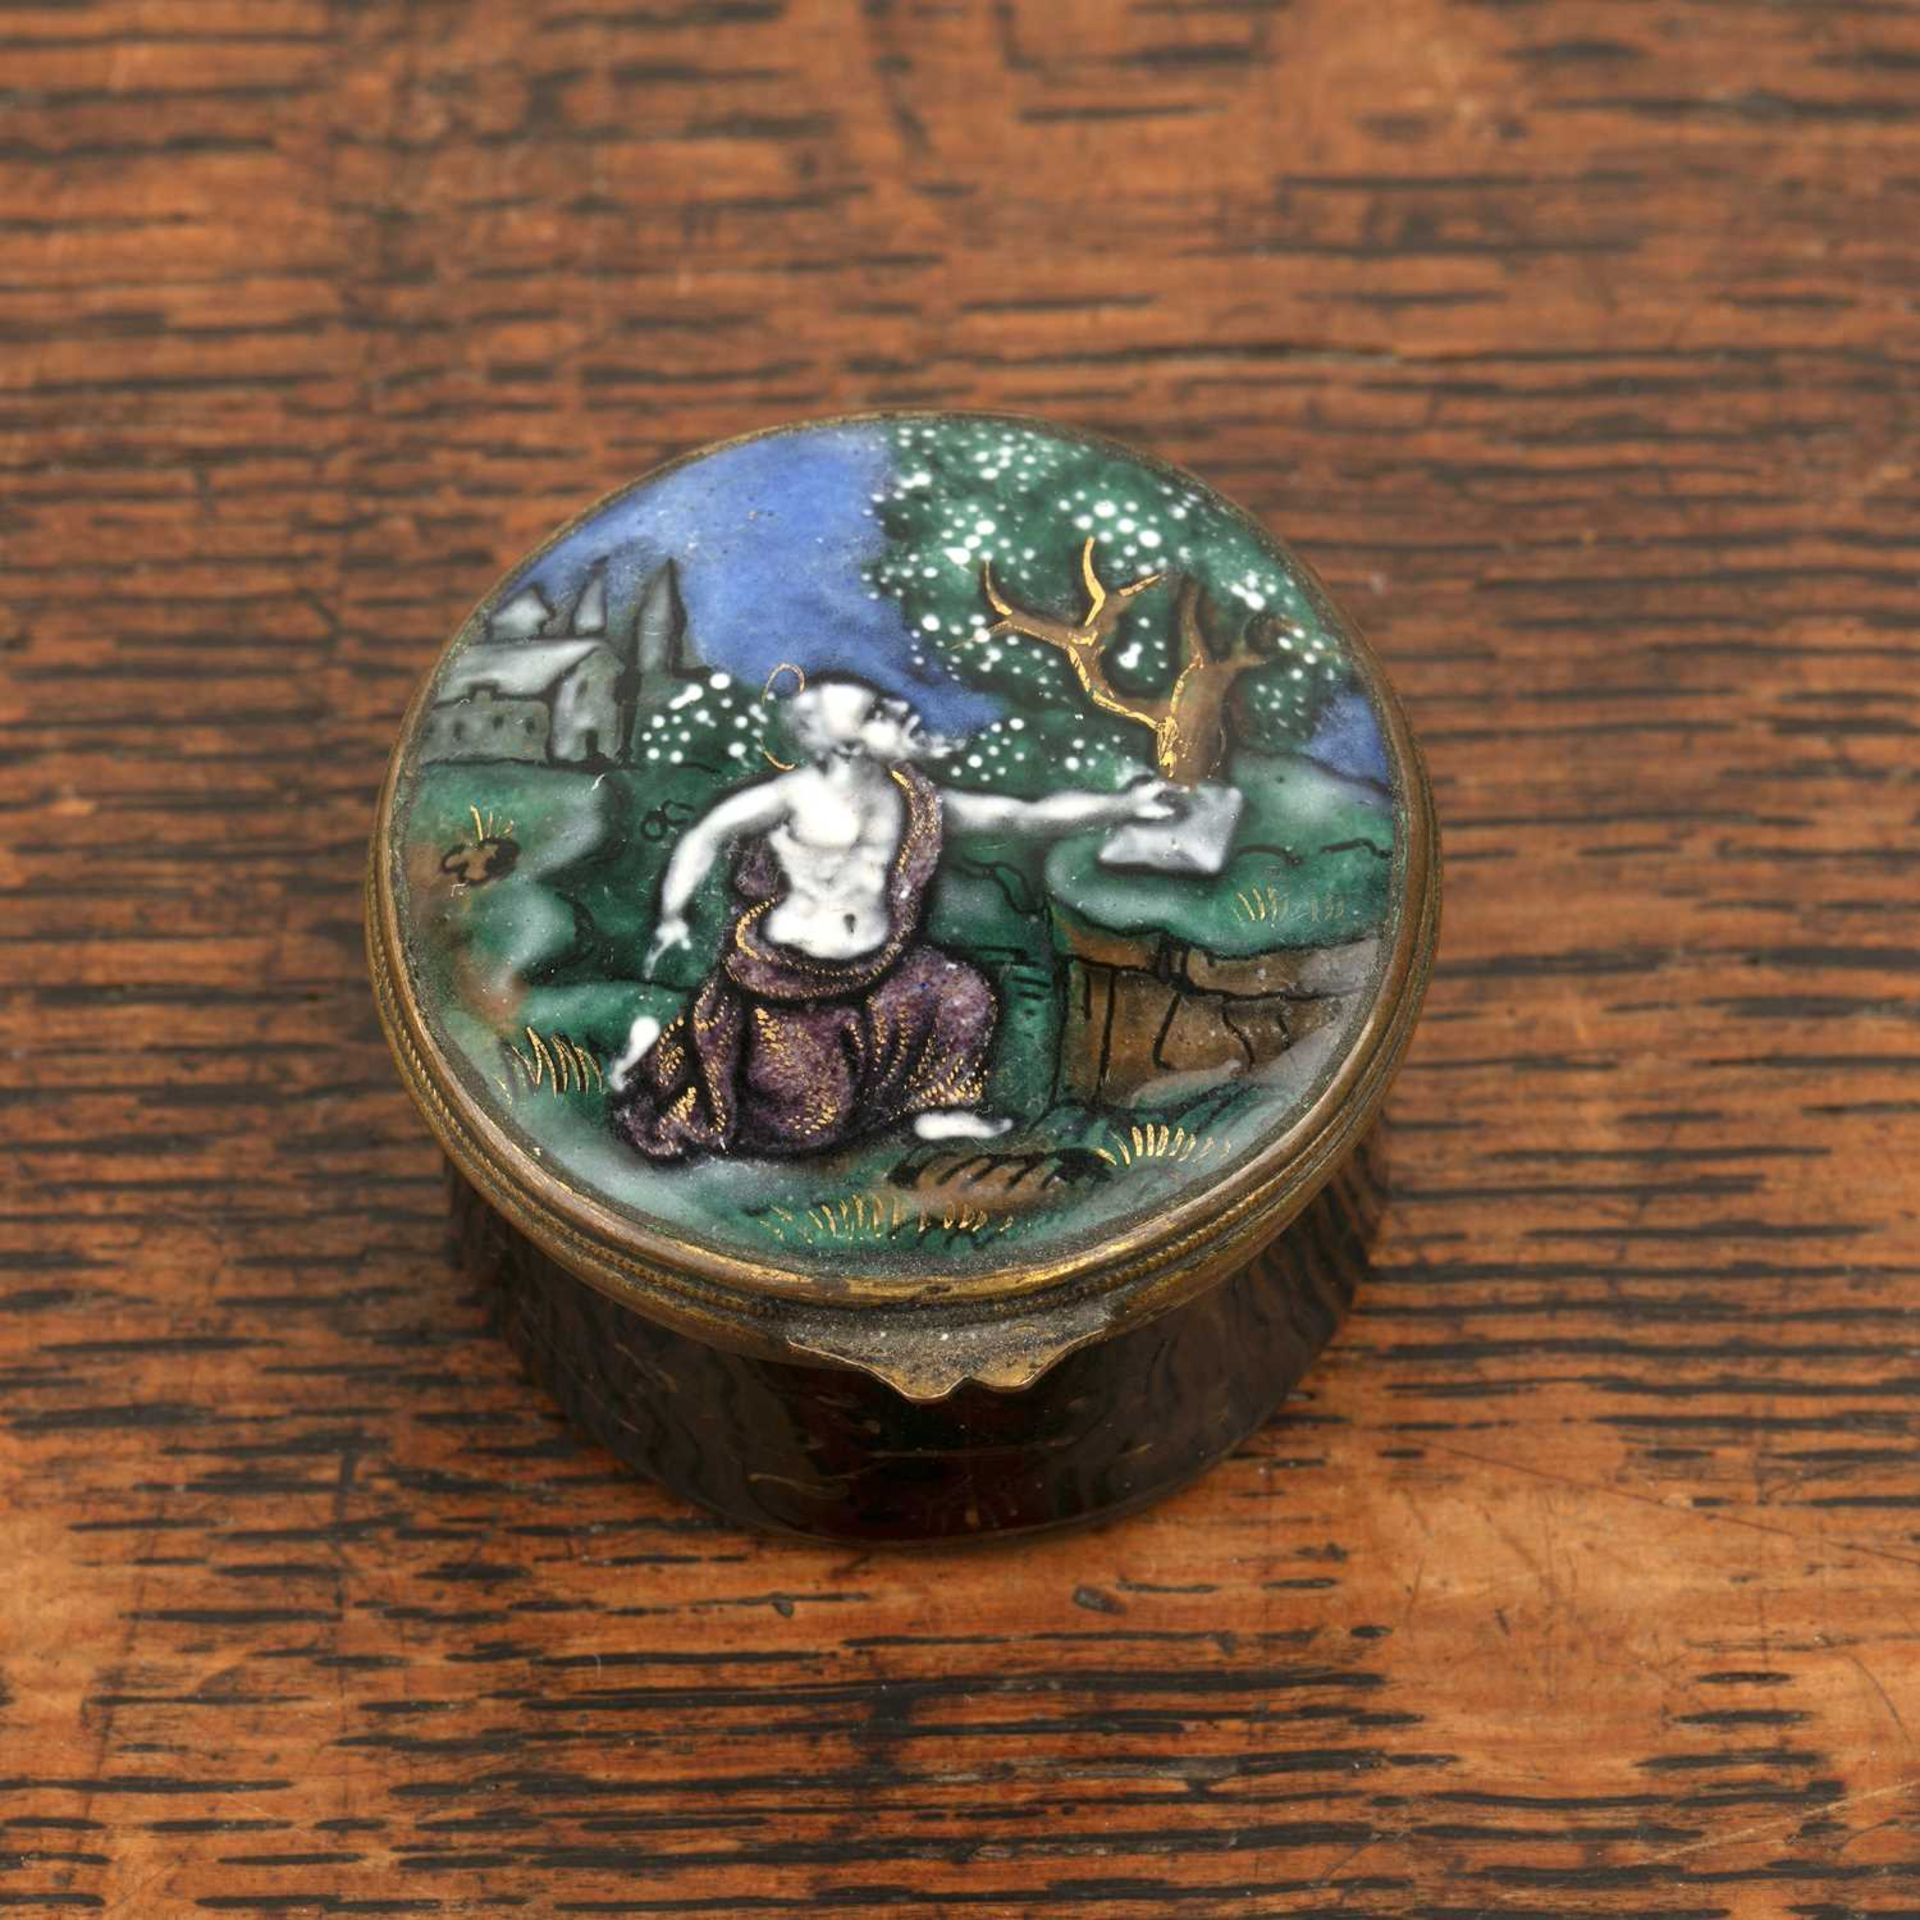 Limoges enamel pill box French, 18th Century, painted with a saint, and with delicately painted